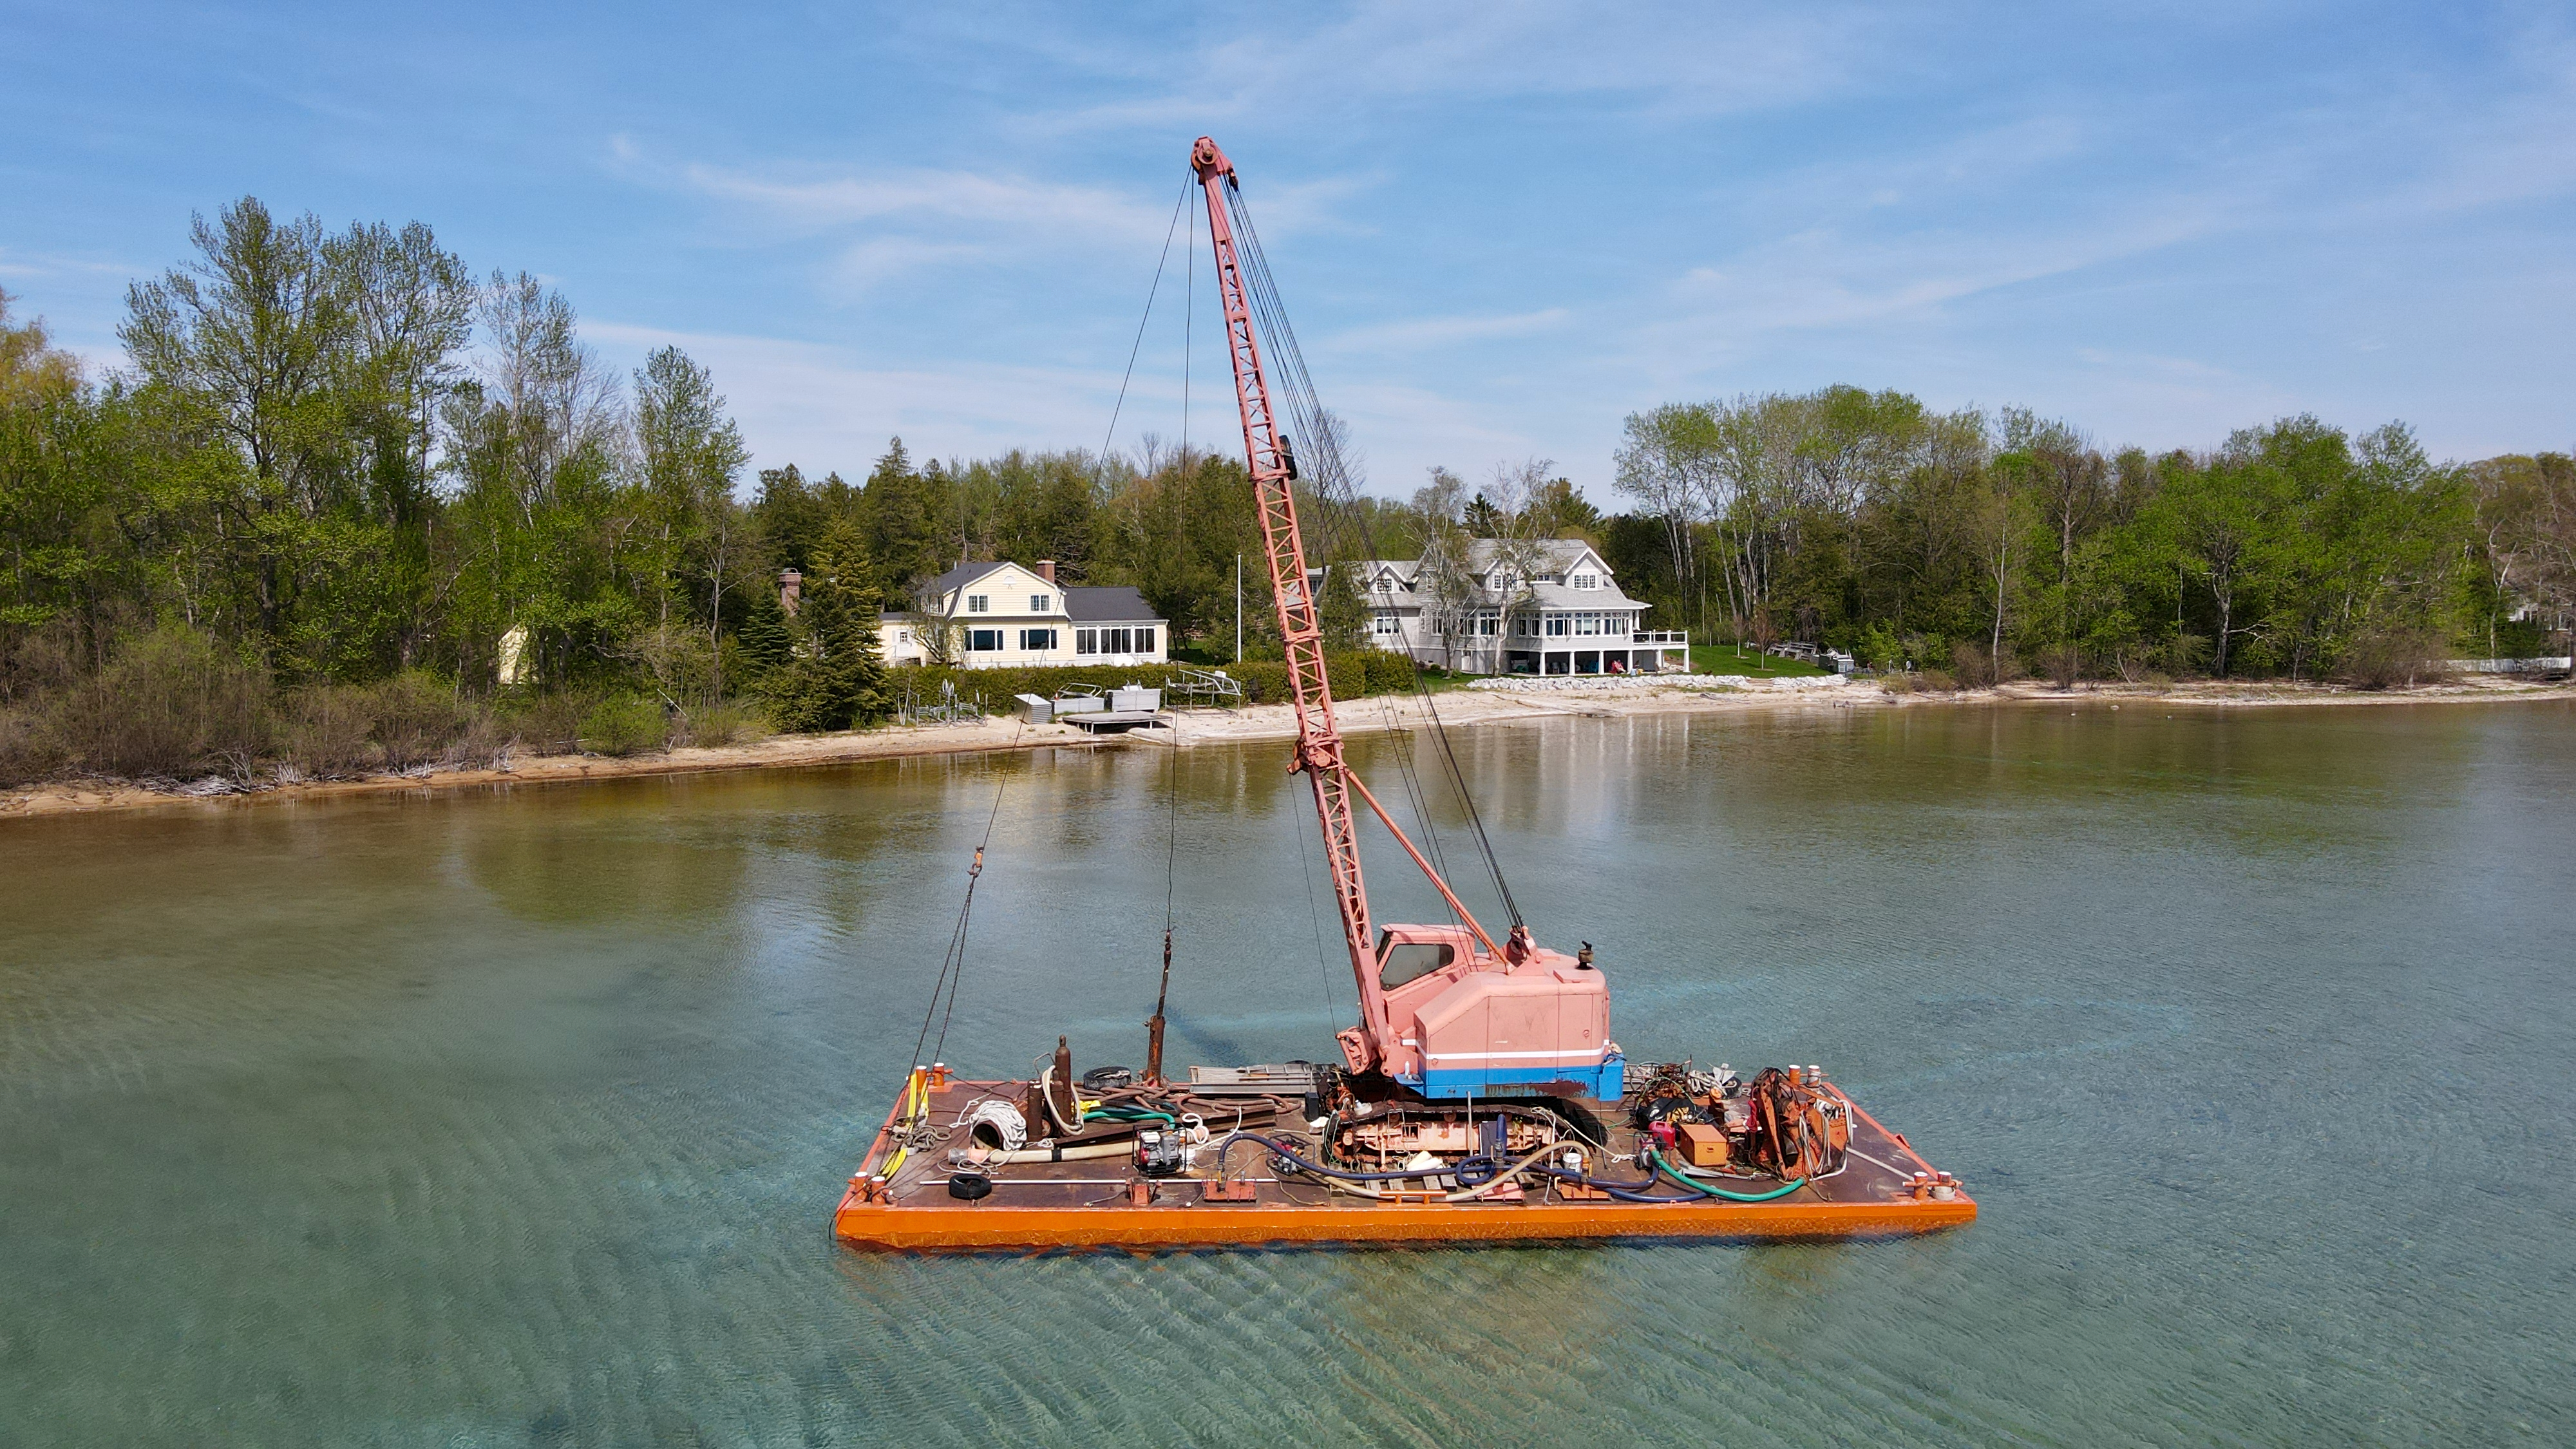 A Balcom Marine Contracting barge in West Grand Traverse Bay’s Hall Bay near Northport, Mich., May 13, 2023. The barge is notorious for sinking in various spots around the area. On June 22, Michigan Attorney General Dana Nessel charged owner Donald Balcom of Traverse City with a felony related to oil releases from the barge and other misdemeanors. (Garret Ellison | MLive) 